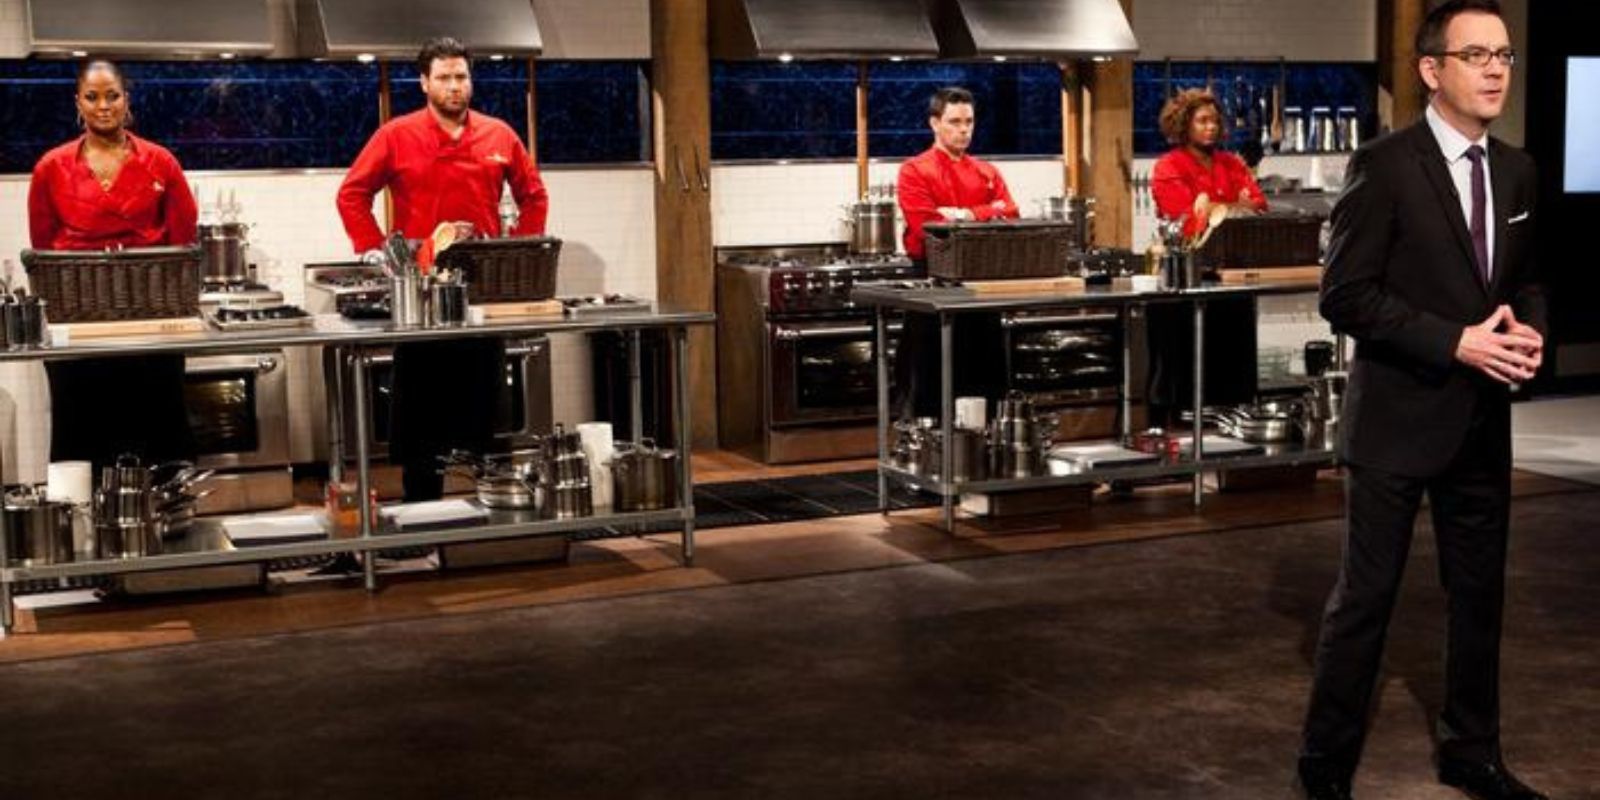 Chefs line up to cook with host in the front